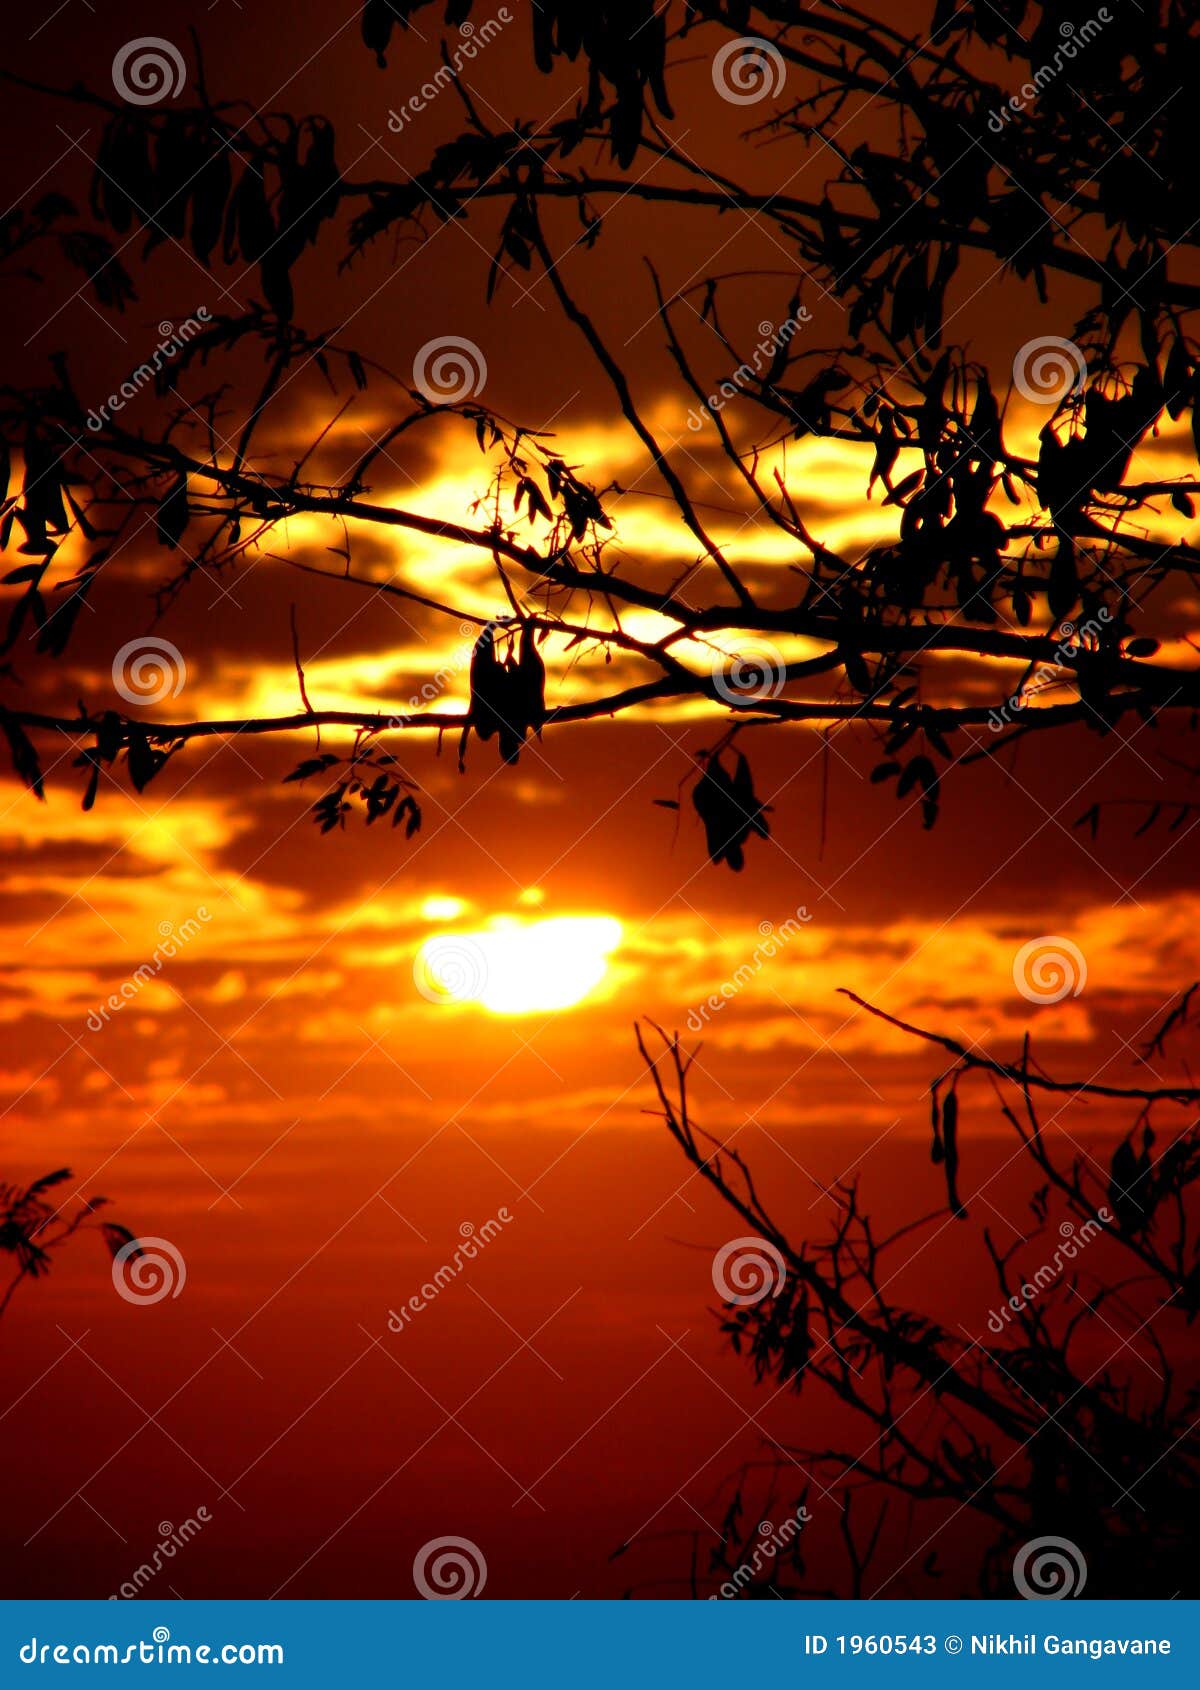 Sunset Branches stock image. Image of energy, artistic - 1960543